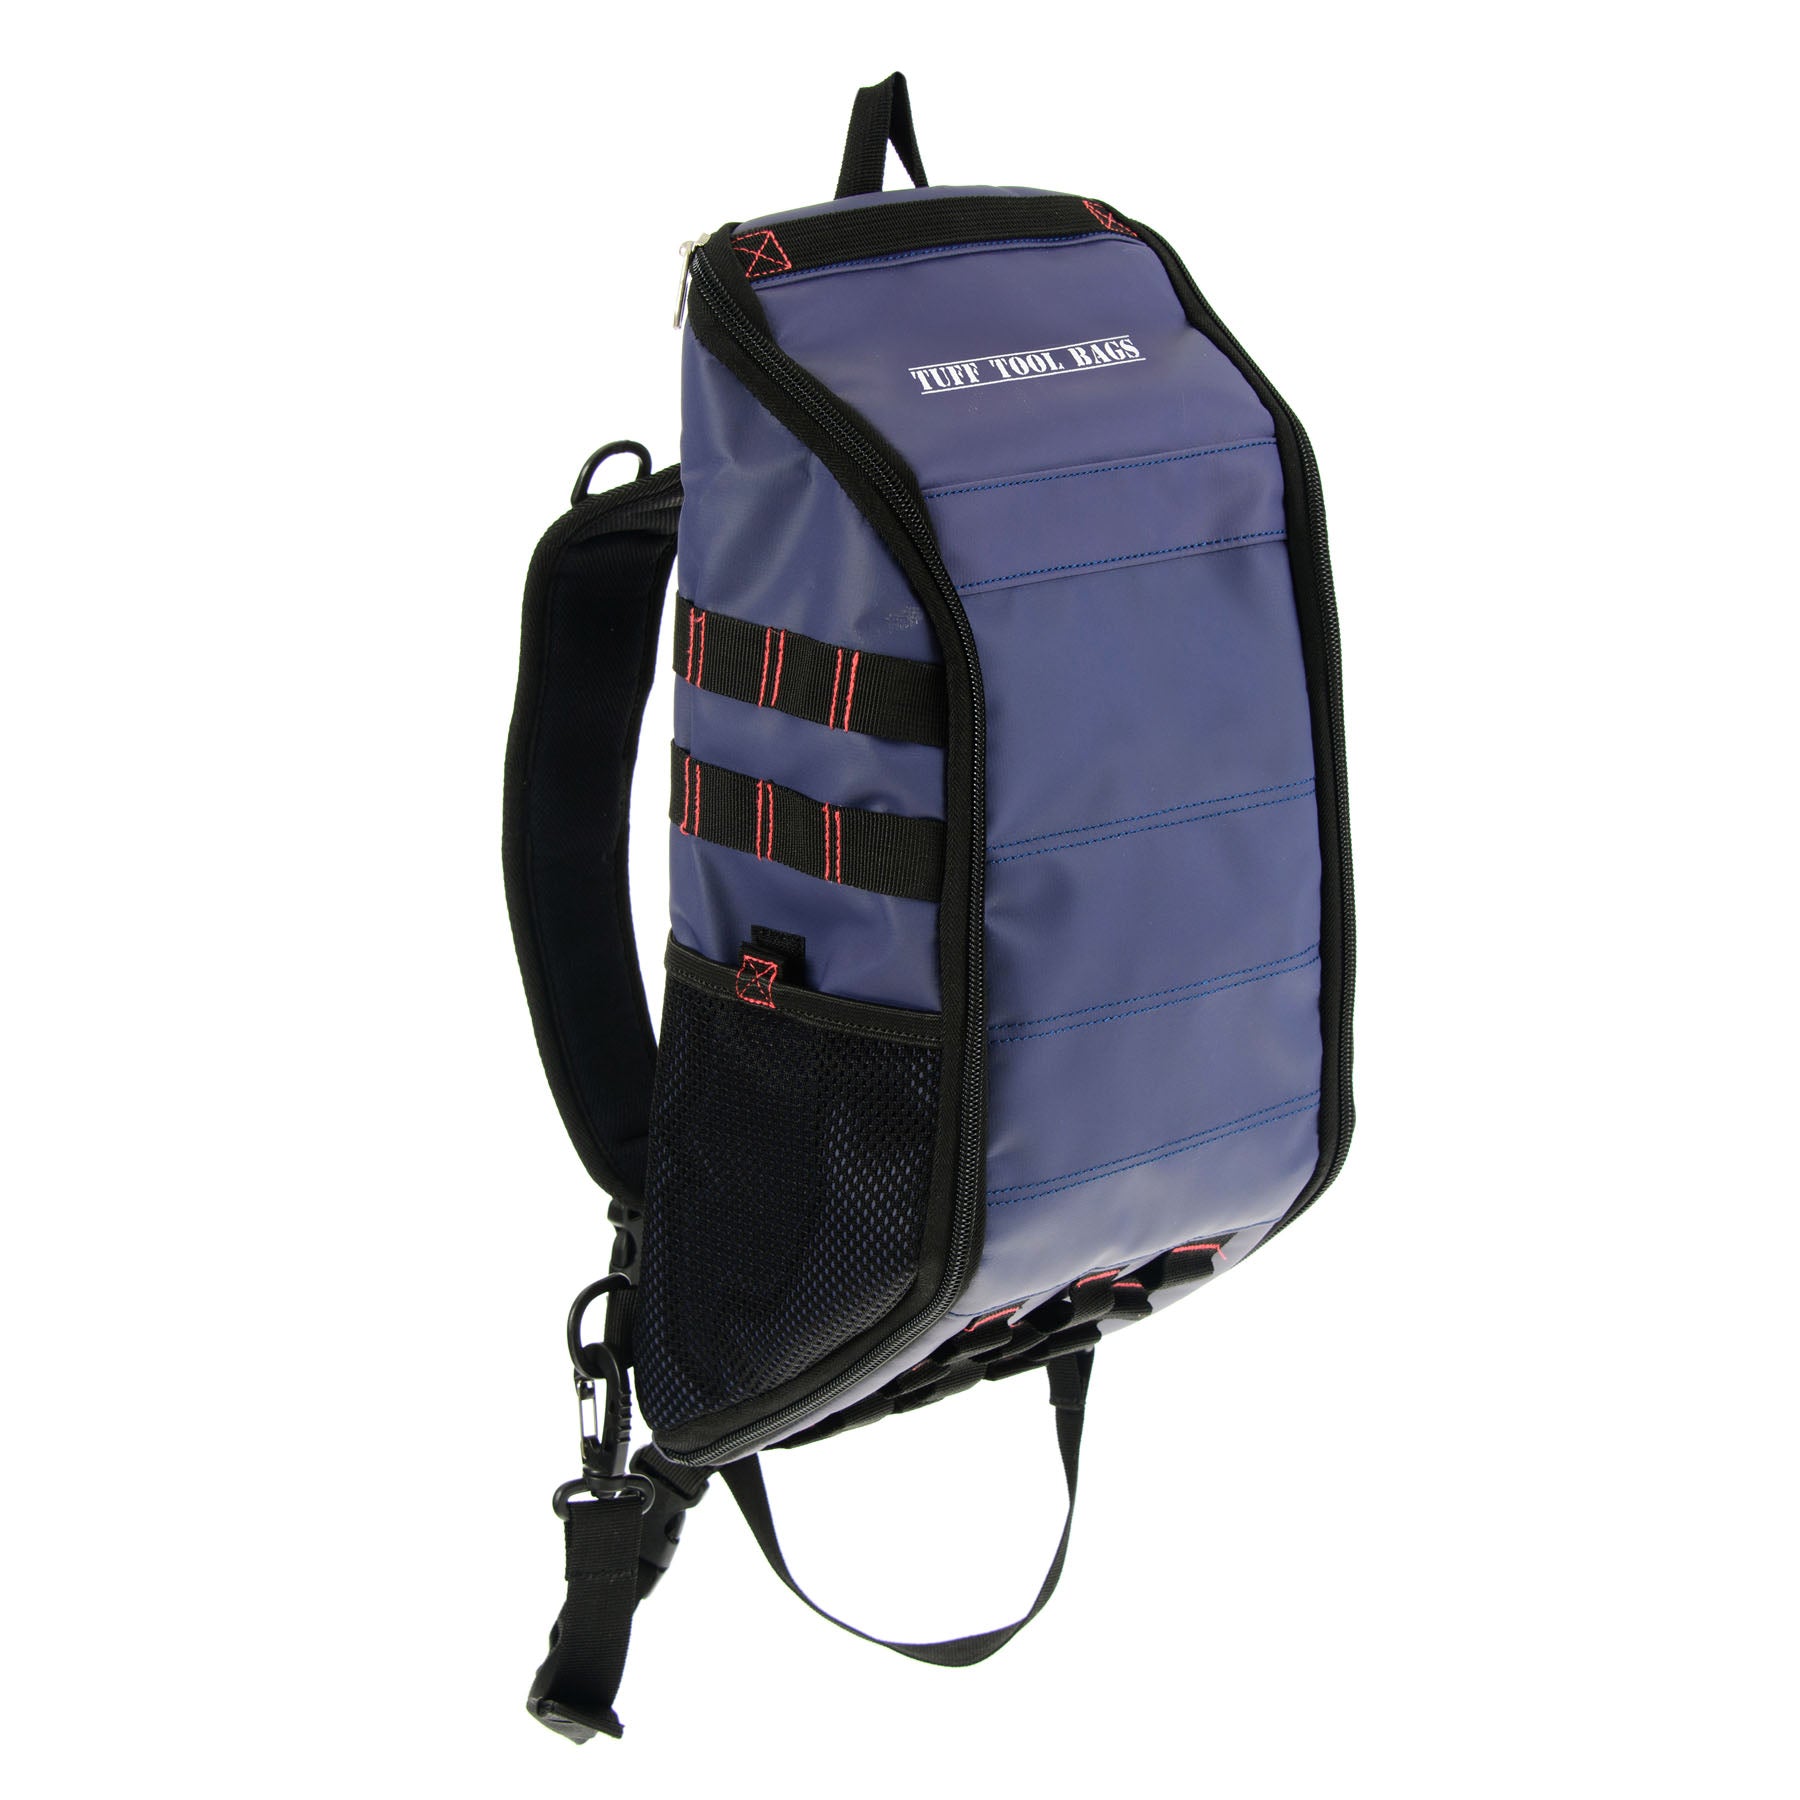 Tuff-Tool-Bags-The-Sling-Hydration-Tool-Bag-lockable-back-pack